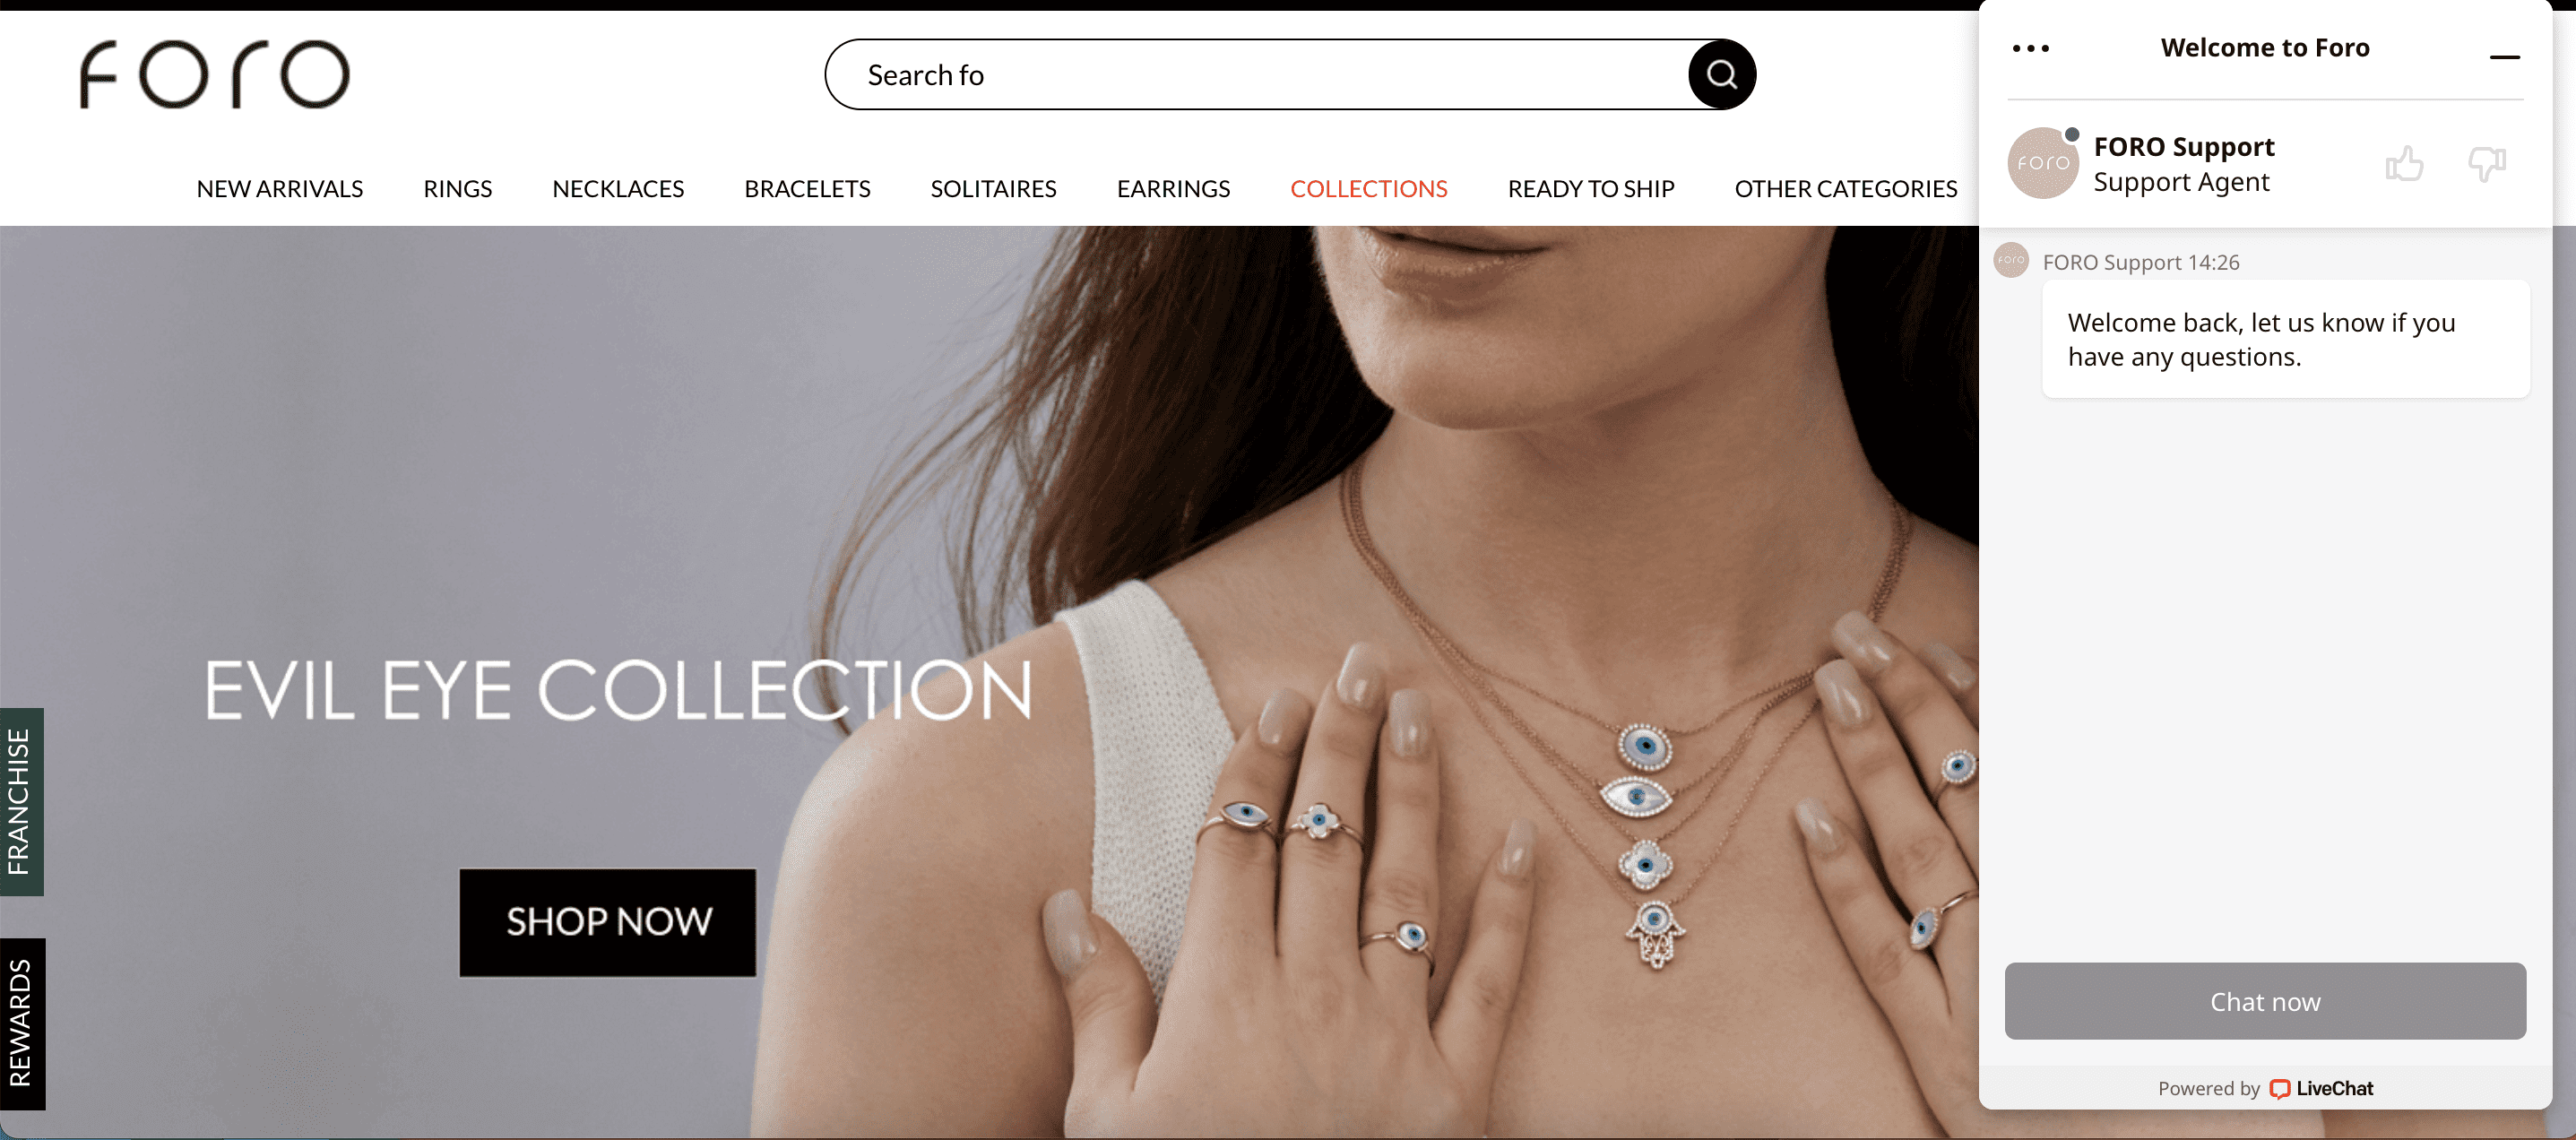 Oxedent's precise audience targeted campaigns & compelling ad copies propelled Foro's website traffic, resulting in an impressive 81% boost in sales